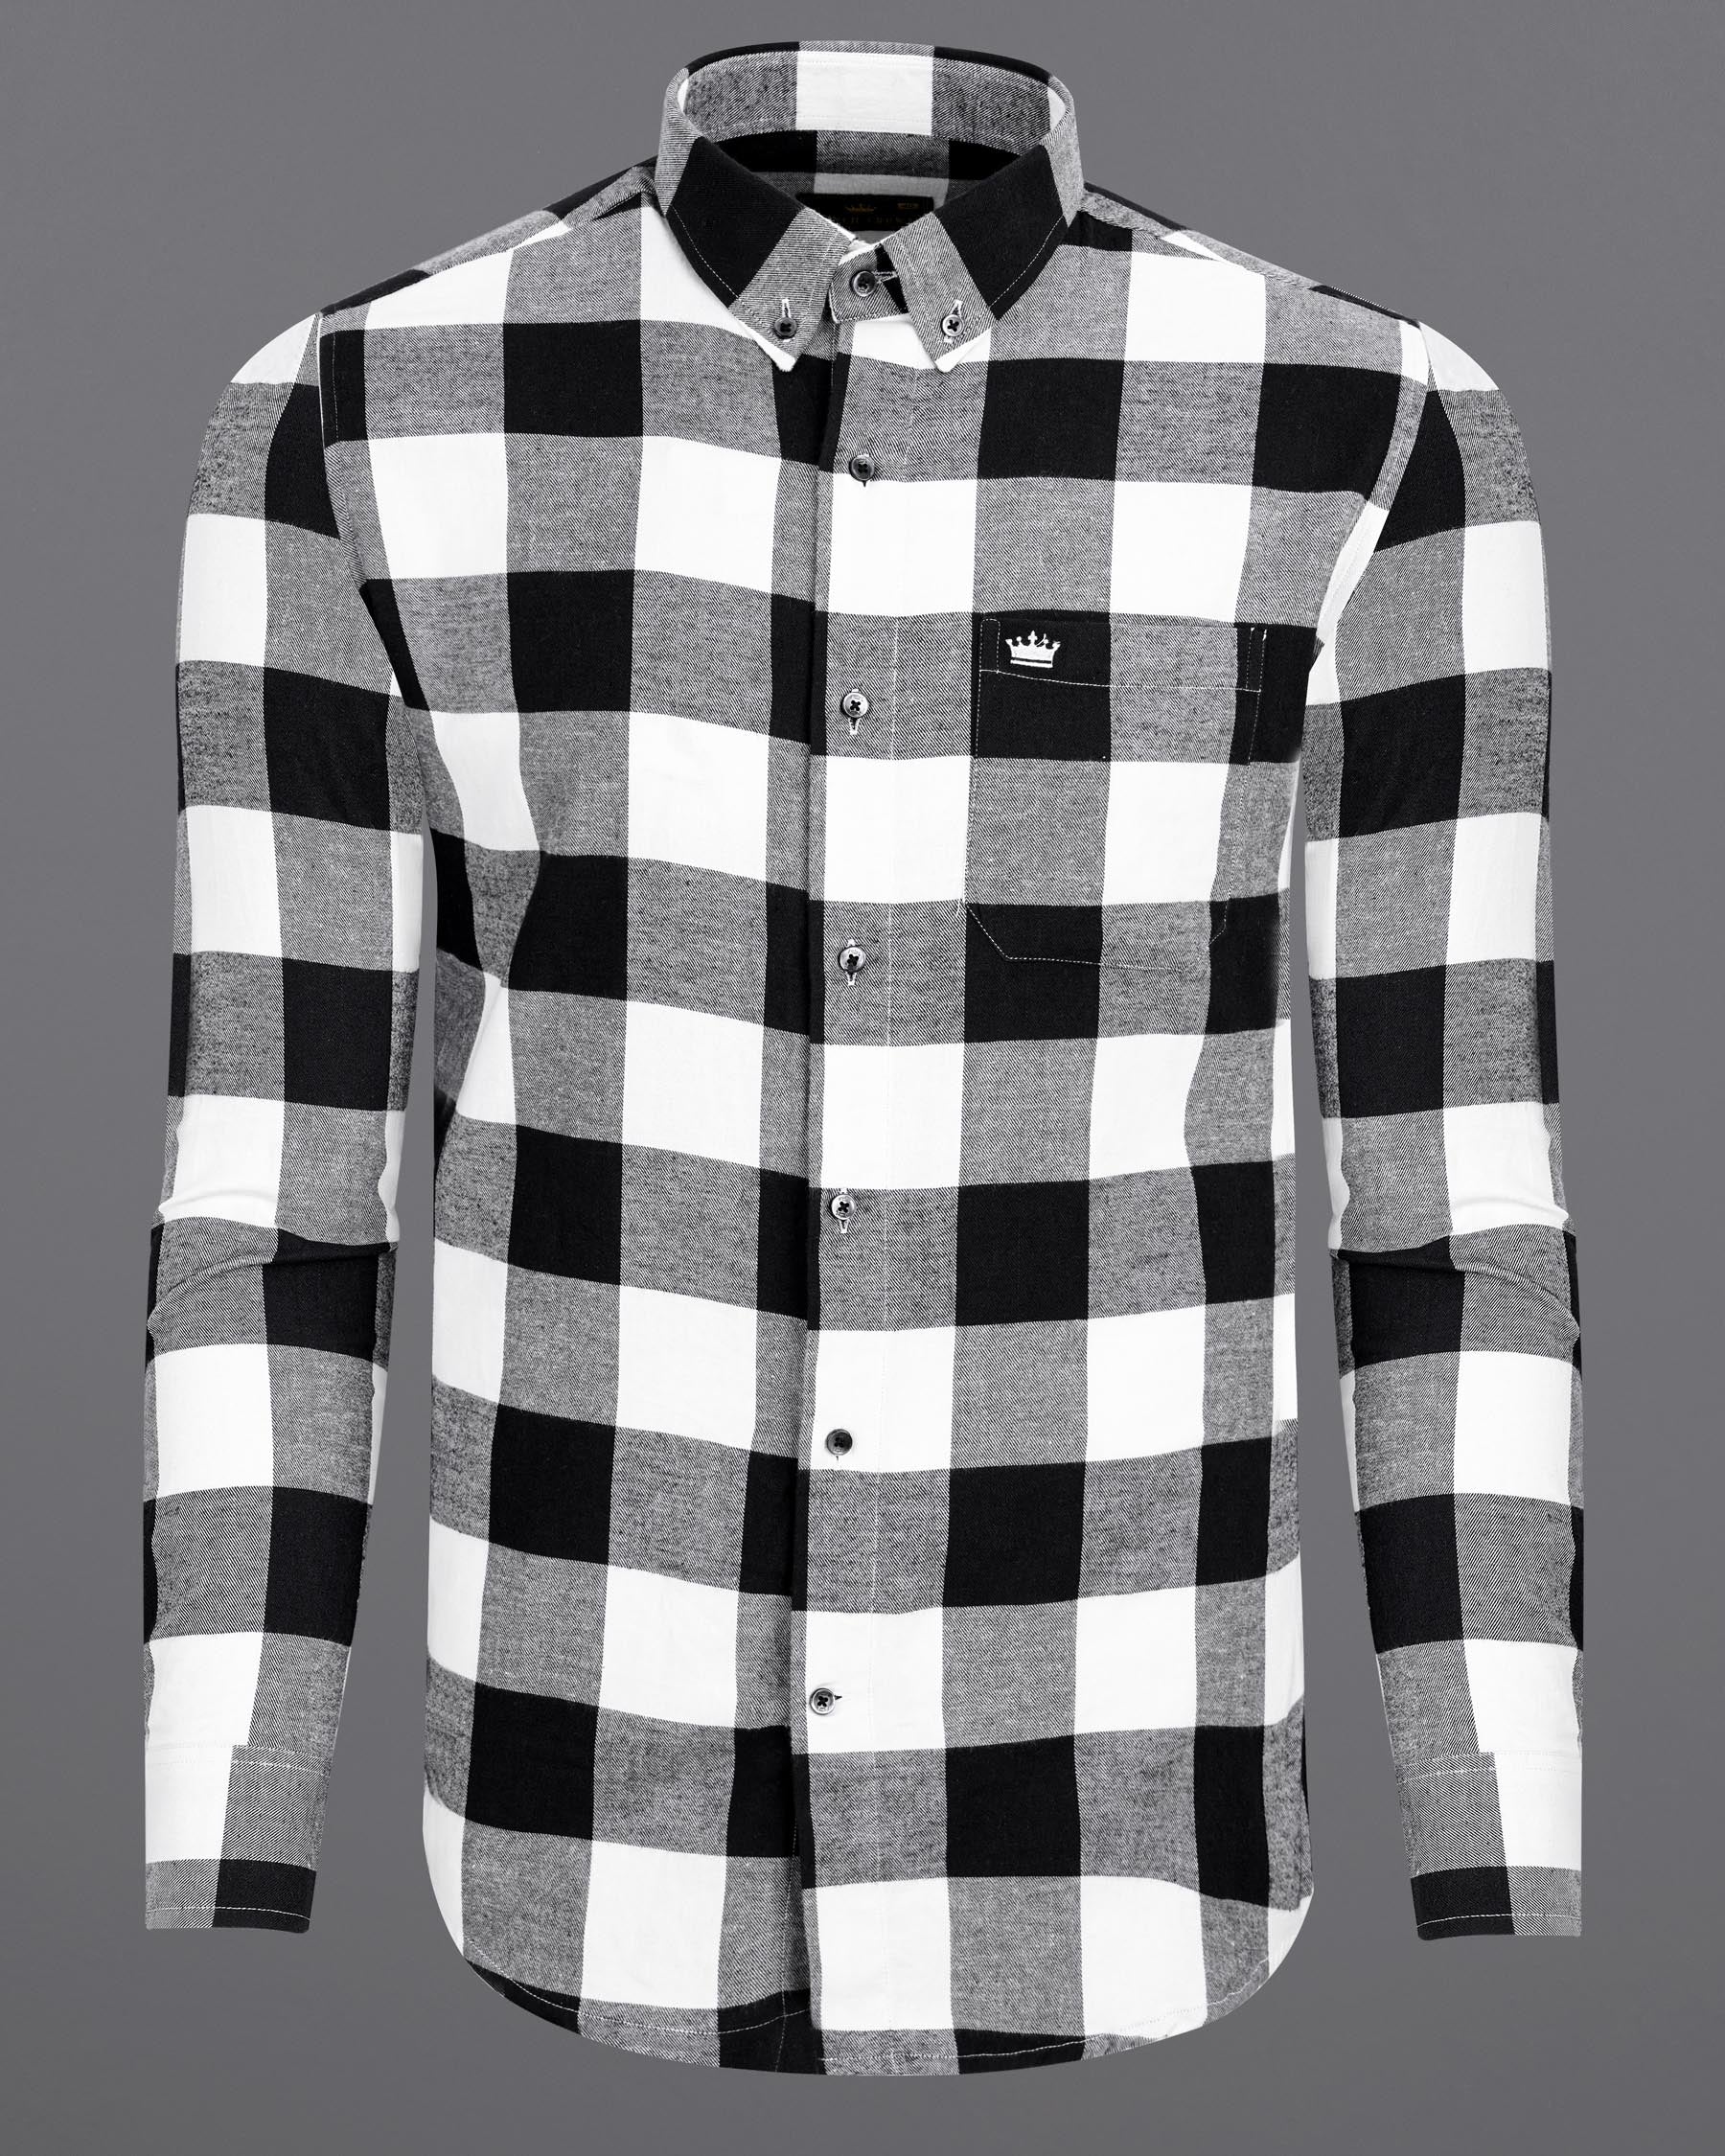 Jade Black and White Checkered Flannel Shirt 7692-BD-BLK-38, 7692-BD-BLK-H-38, 7692-BD-BLK-39,7692-BD-BLK-H-39, 7692-BD-BLK-40, 7692-BD-BLK-H-40, 7692-BD-BLK-42, 7692-BD-BLK-H-42, 7692-BD-BLK-44, 7692-BD-BLK-H-44, 7692-BD-BLK-46, 7692-BD-BLK-H-46, 7692-BD-BLK-48, 7692-BD-BLK-H-48, 7692-BD-BLK-50, 7692-BD-BLK-H-50, 7692-BD-BLK-52, 7692-BD-BLK-H-52